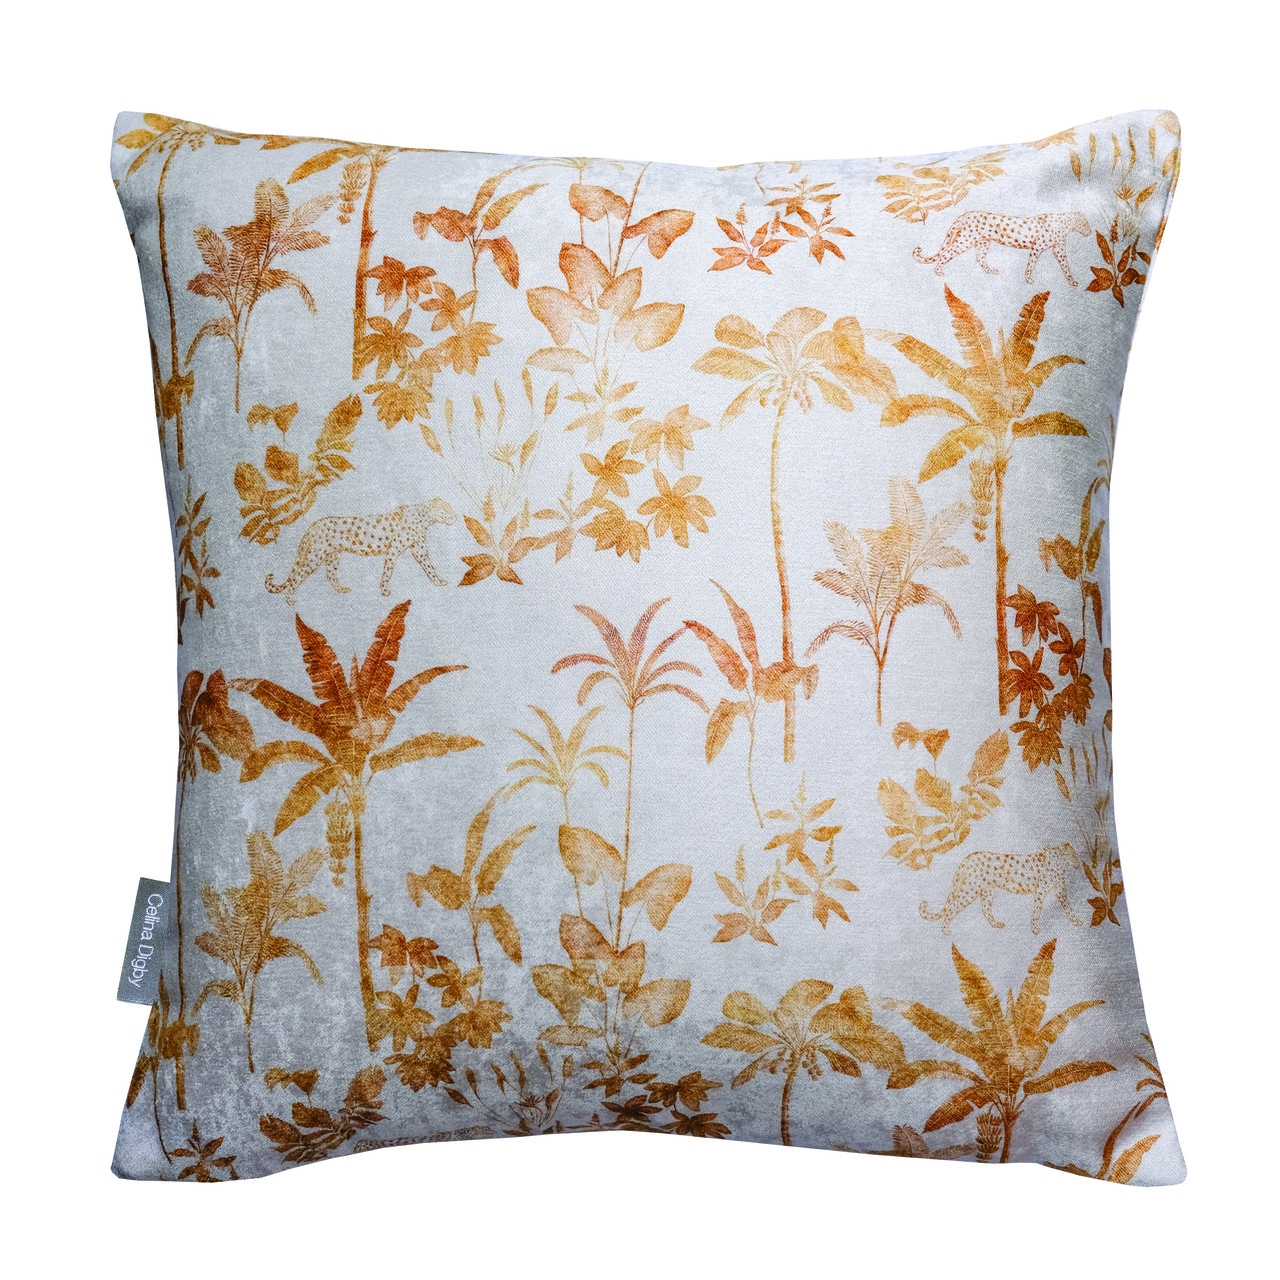 Celina Digby Luxury Opulent Velvet Cushion – Rain Forest Ivory (Available in 2 Sizes) Standard (45x45cm) Hollow Fibre Filling